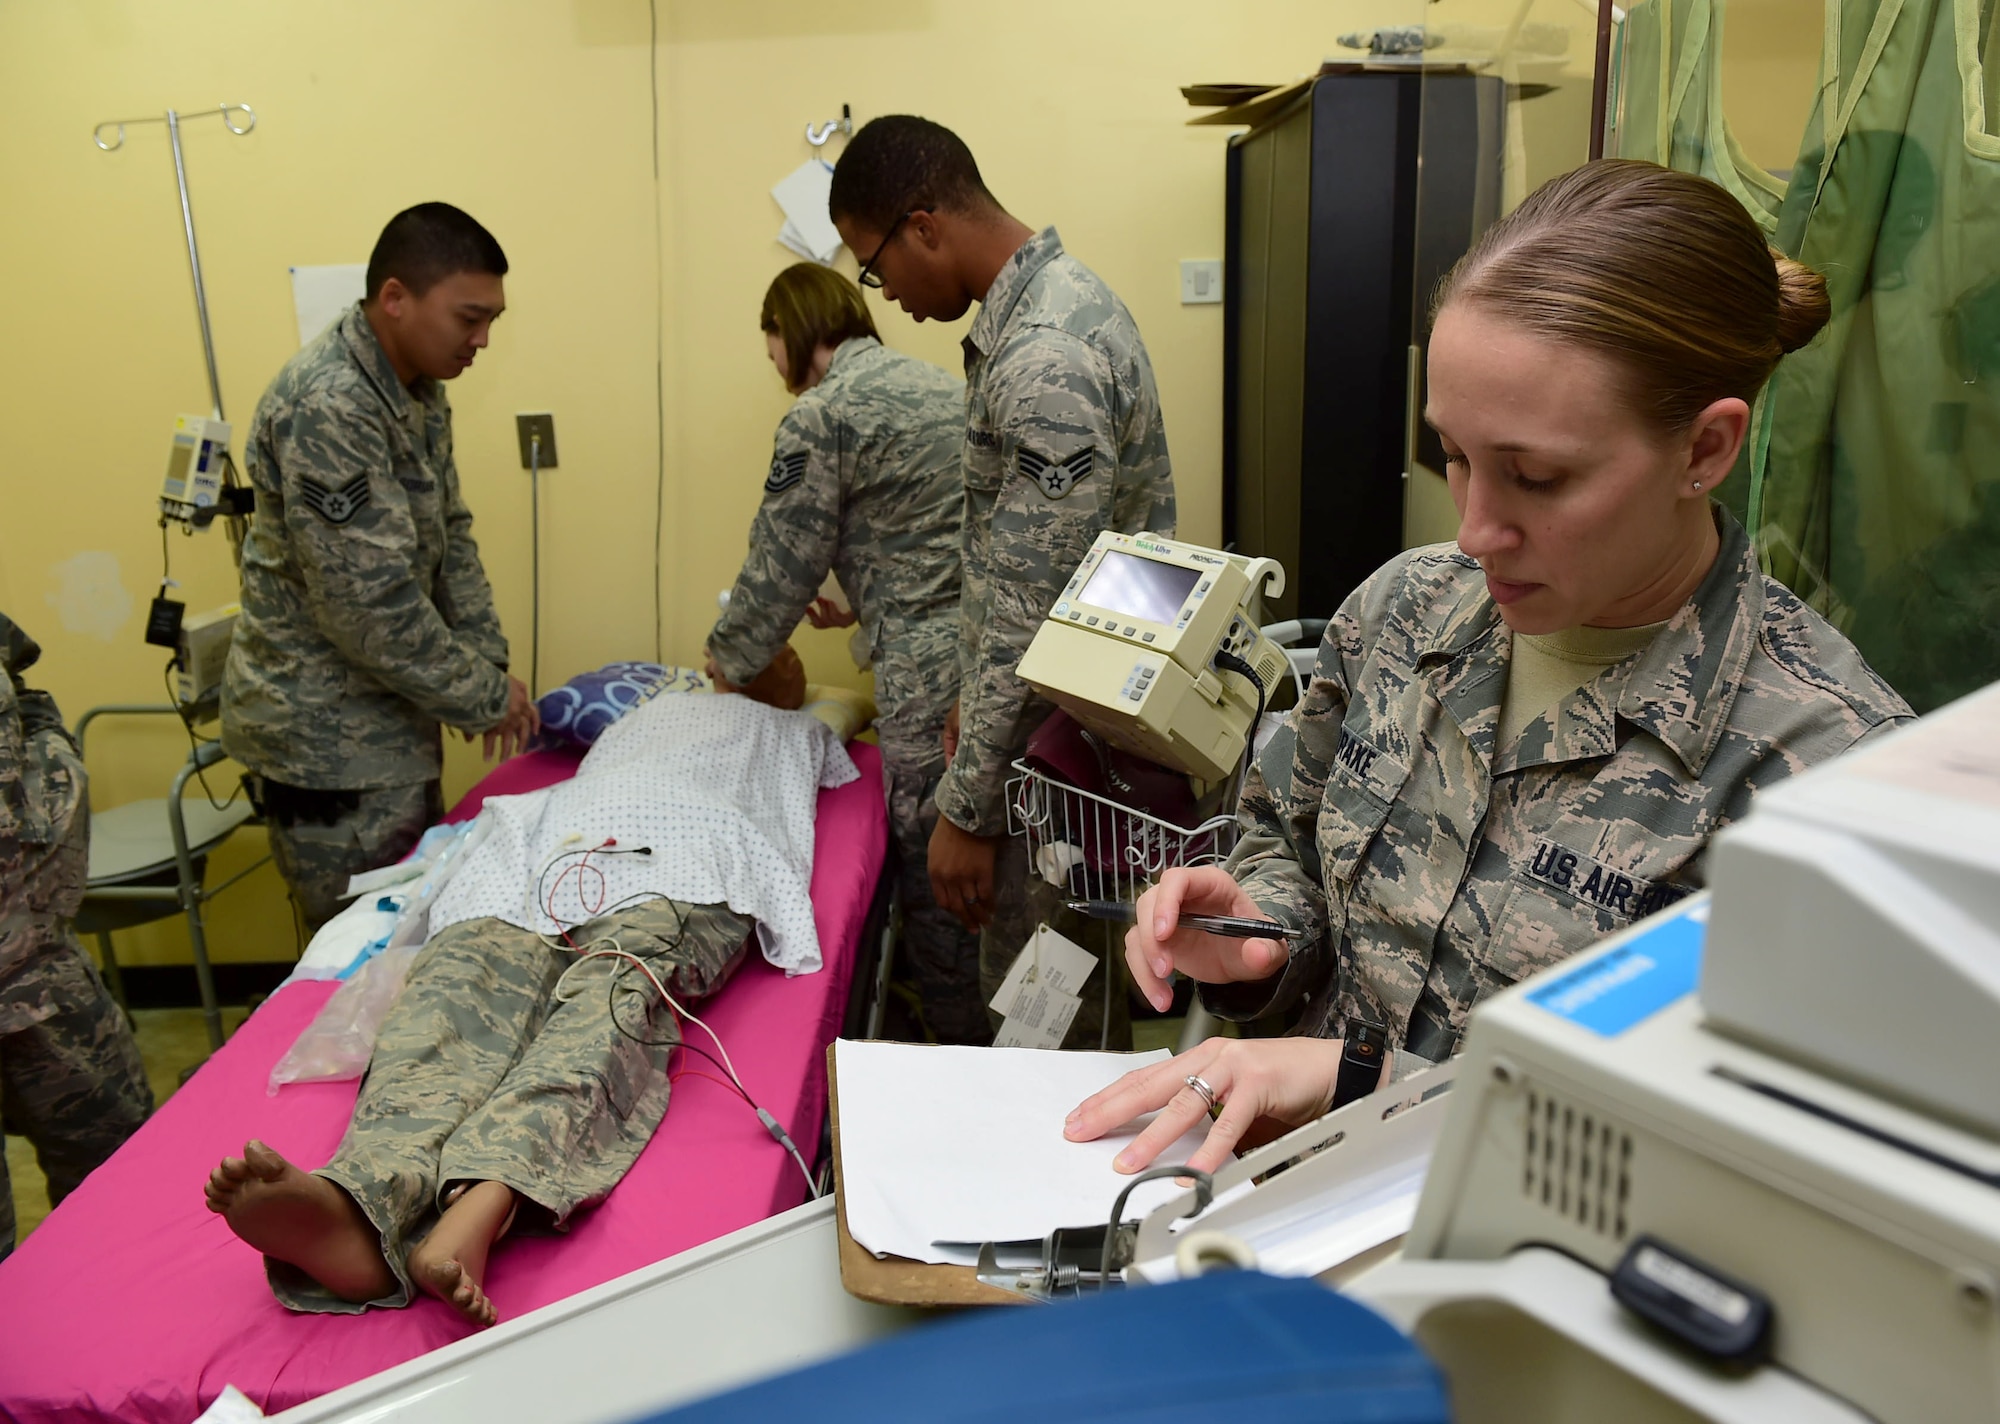 Staff Sgt. Jennifer Drake, 386th Expeditionary Medical Group medical technician, records treatment procedures during a Code Blue exercise at an undisclosed location in Southwest Asia, Nov. 28, 2015. Comprised of more than 40 Airmen, the medical group is responsible for providing care to more than 3,500 U.S. and coalition forces supporting Operation INHERENT RESOLVE. (U.S. Air Force photo by Staff Sgt. Jerilyn Quintanilla) 